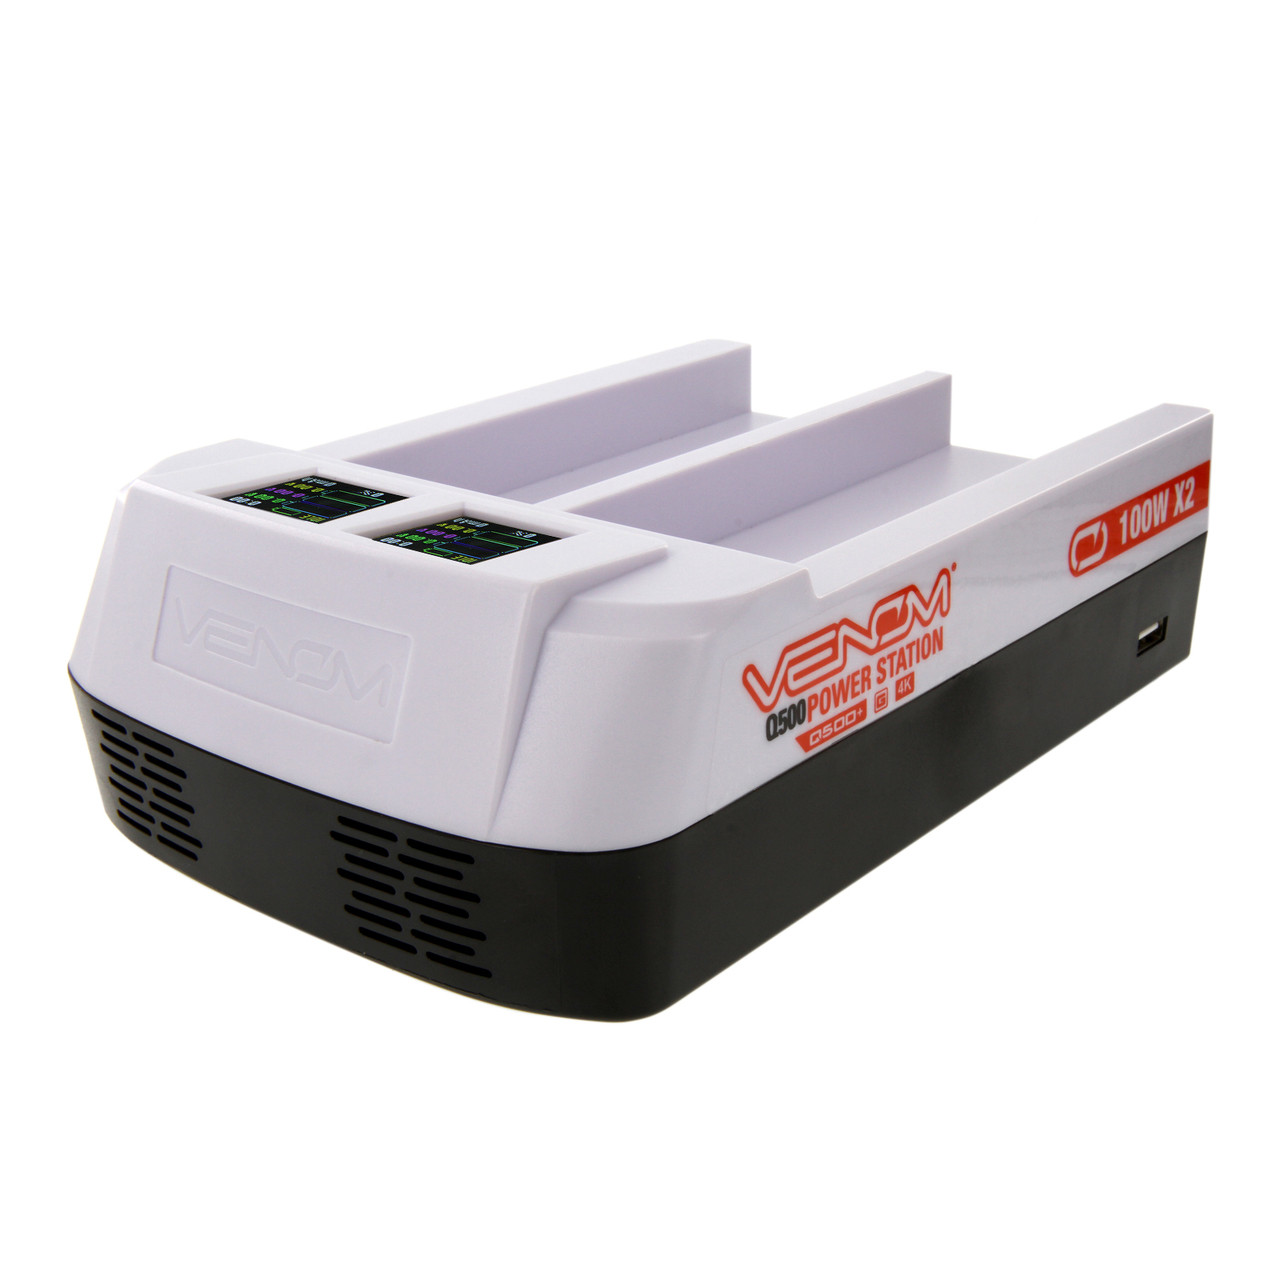 Yuneec TyphoYuneec Typhoon Q500 Power Station 6Amp Dual Output LiPo Battery Charger by Venomon Q500 Power Station 6Amp Dual Output LiPo Battery Charger by Venom